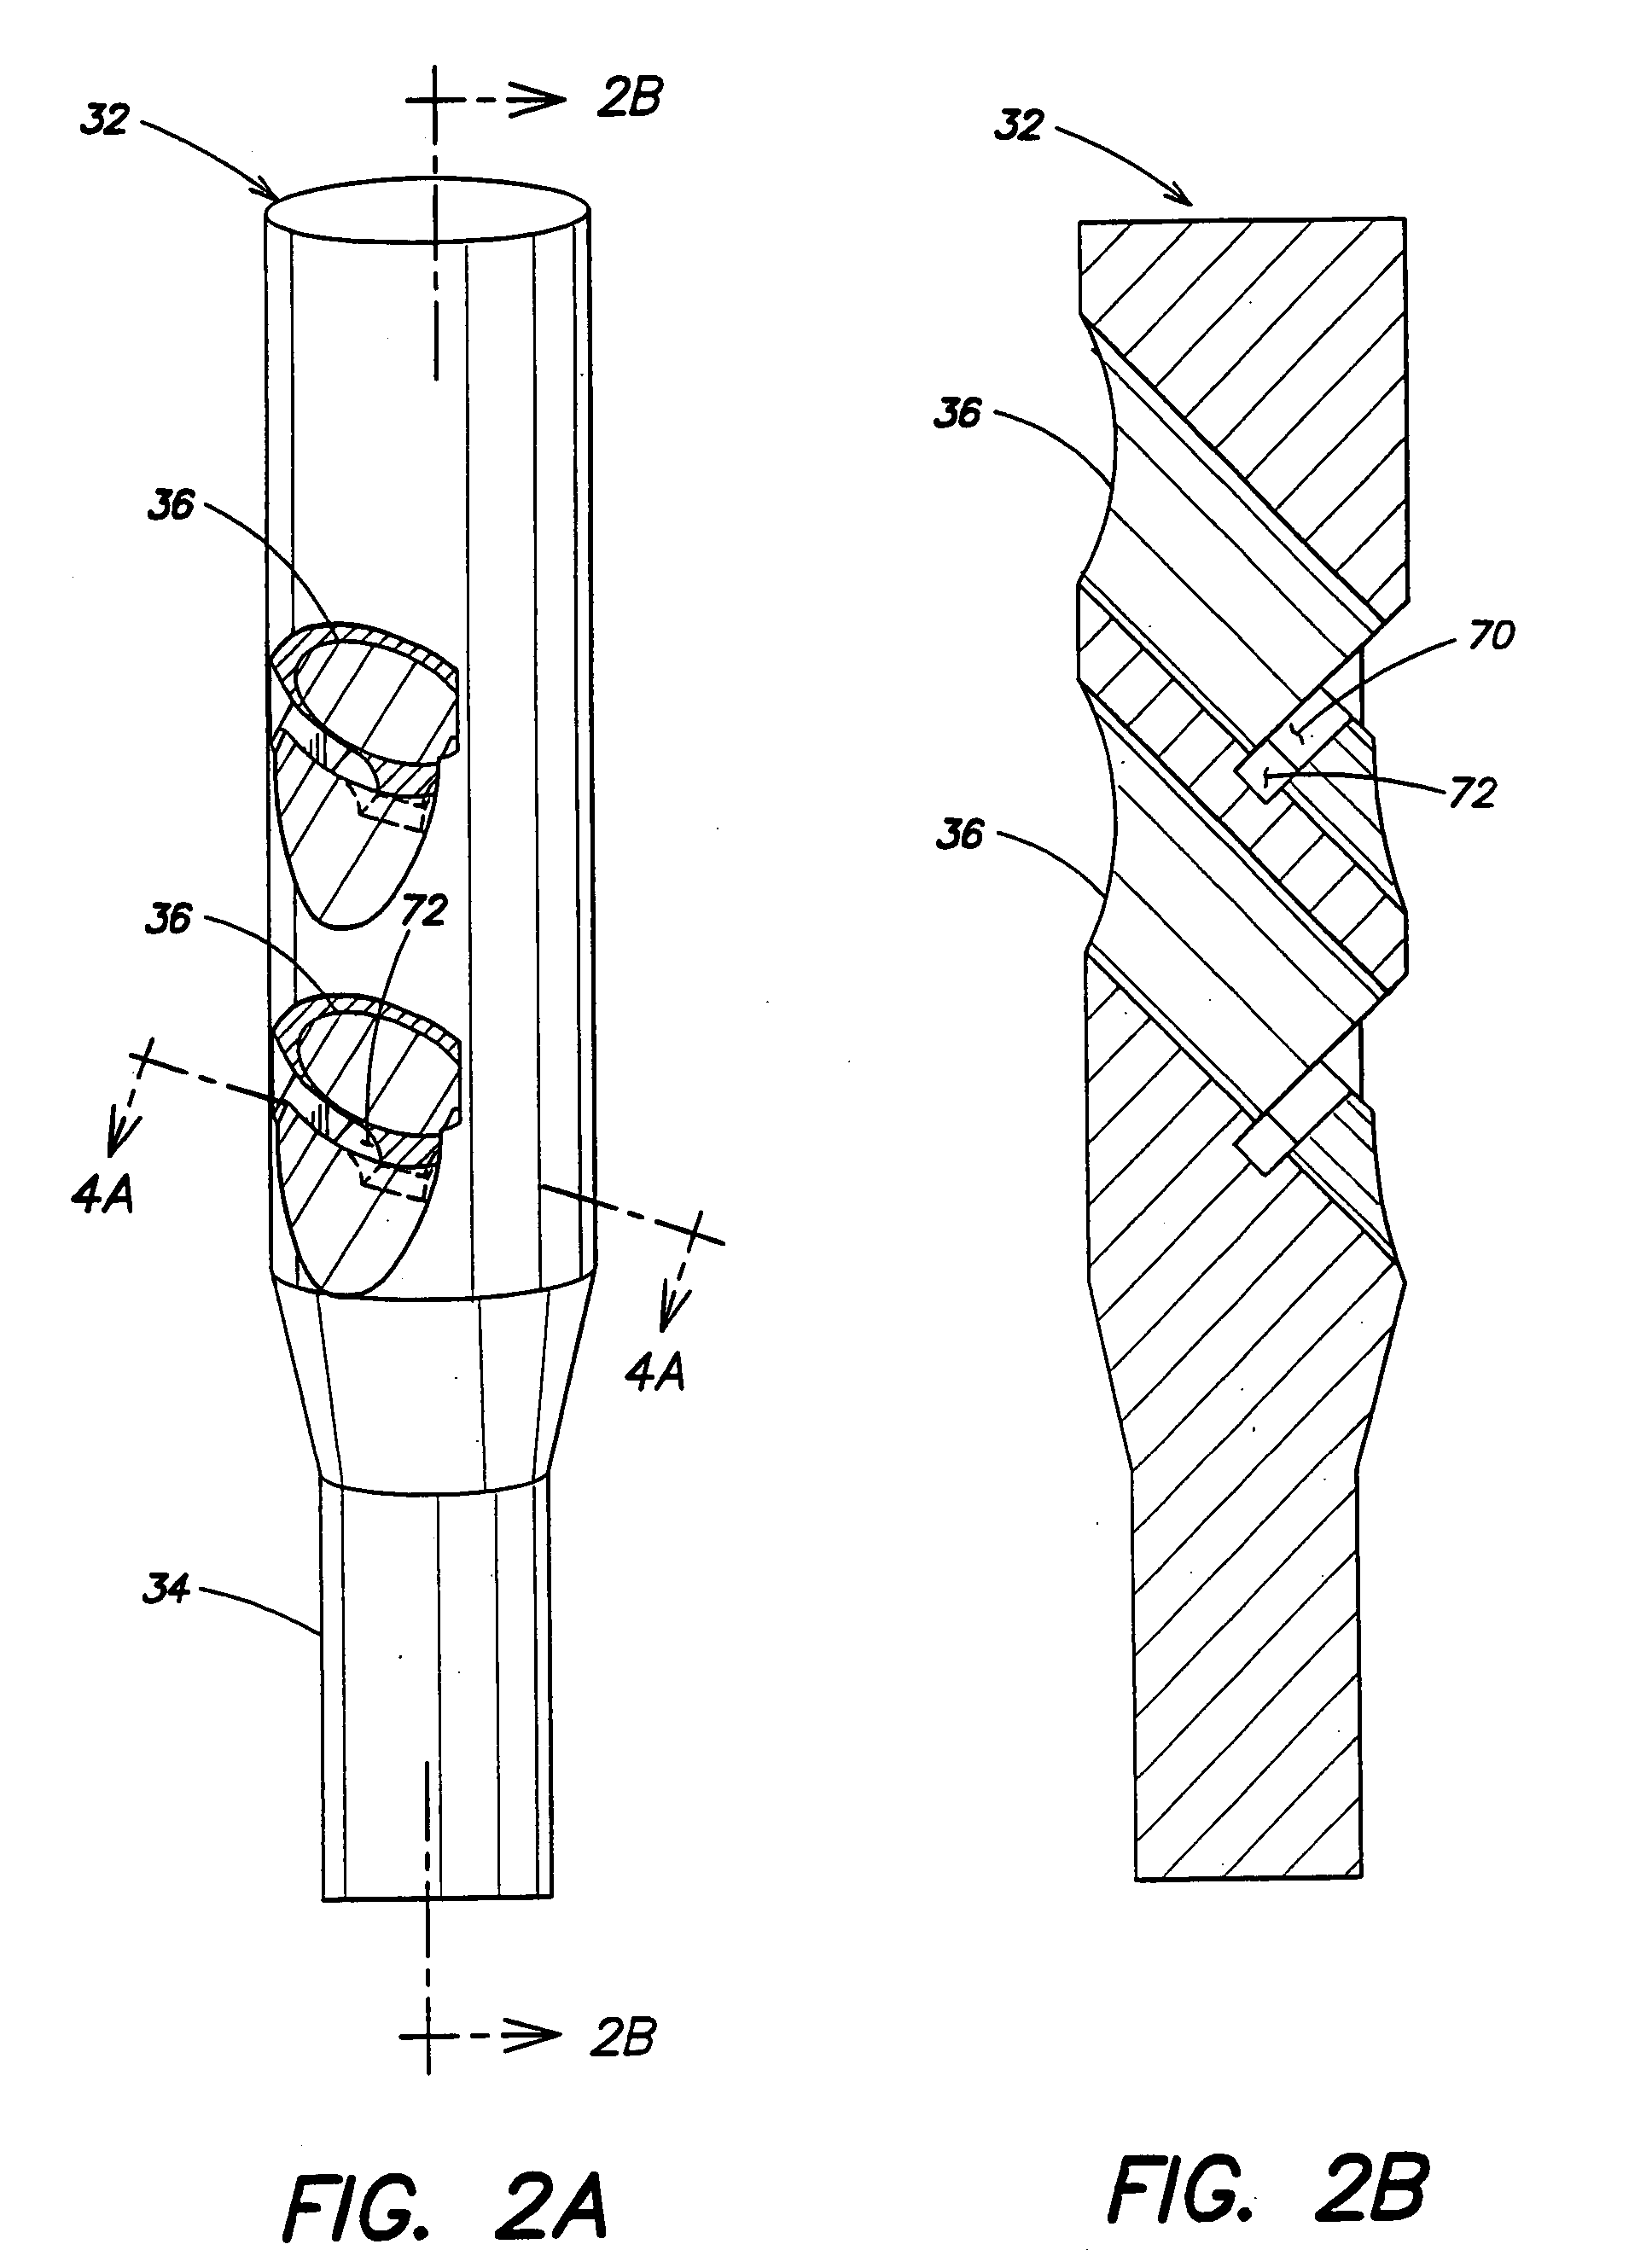 Intramedullary nail system and method for fixation of a fractured bone